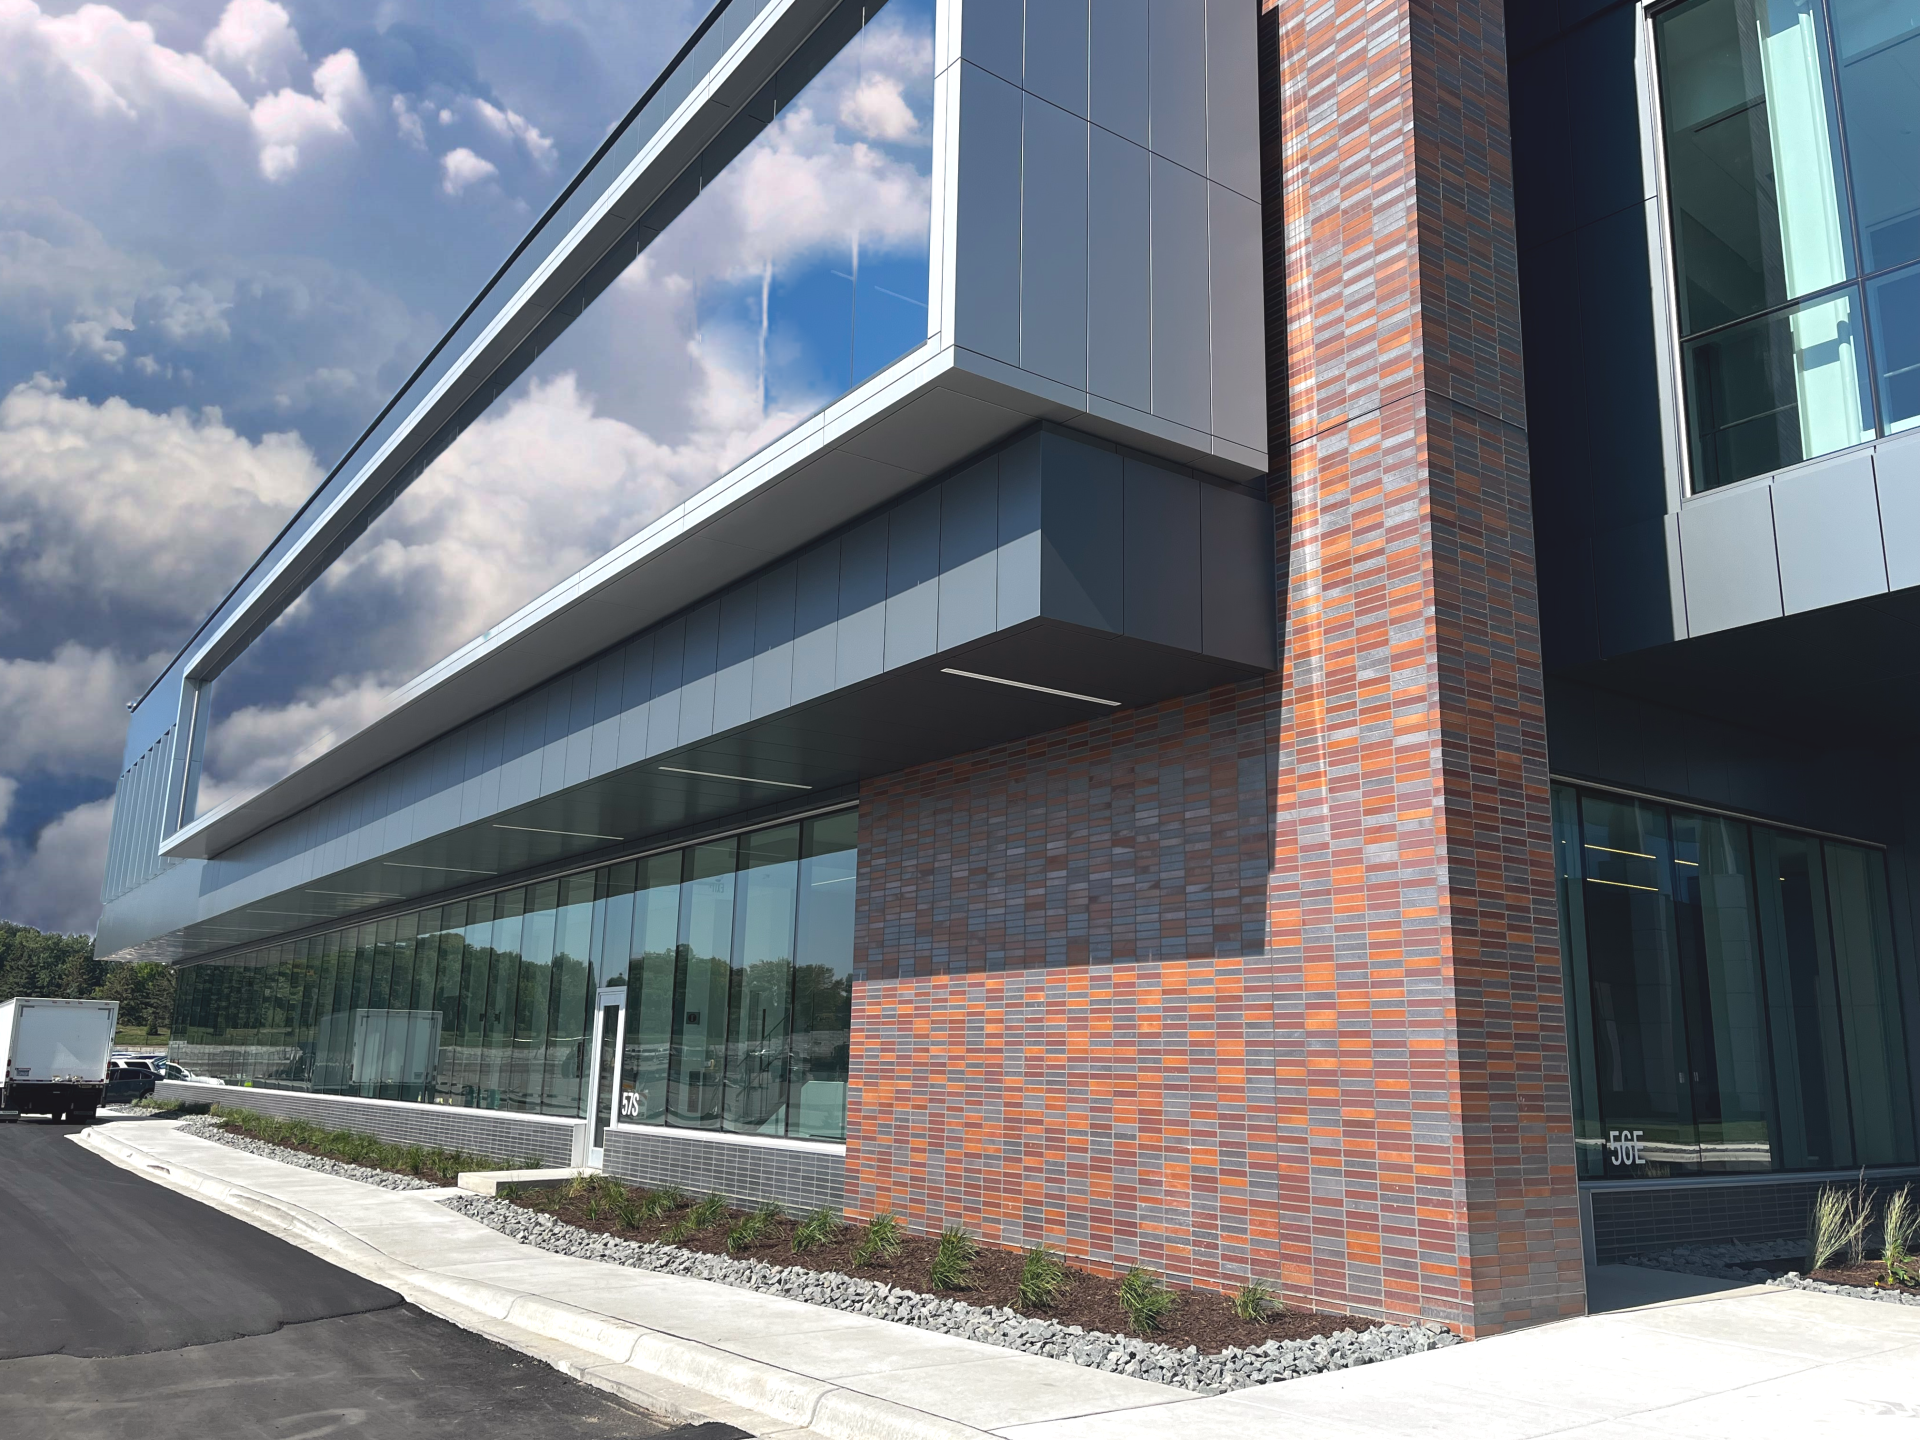 w l hall company The Premier Exterior and Interior Building Systems Provider in the Upper Midwest boston scientific glass & glazing 2